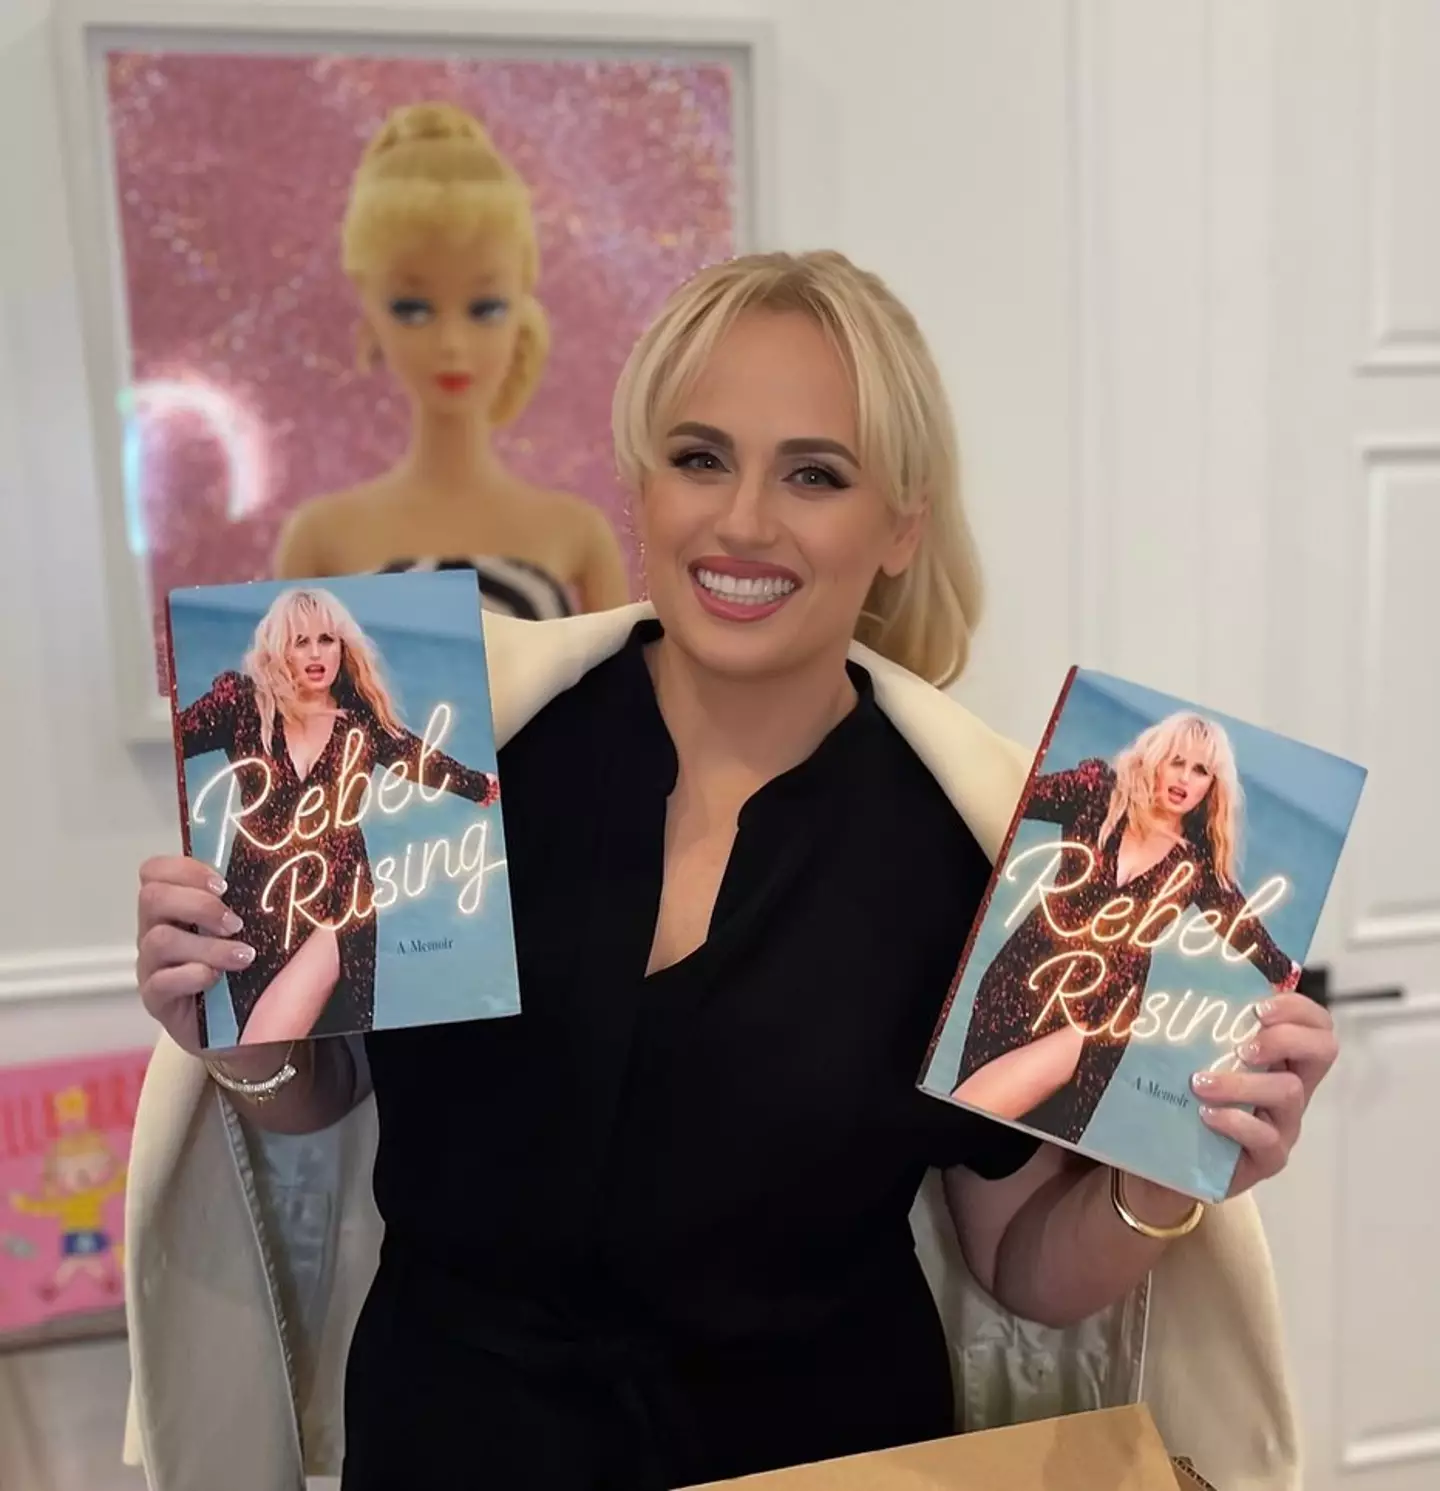 Rebel Wilson said she will spill the tea in chapter 23 of Rebel Rising.